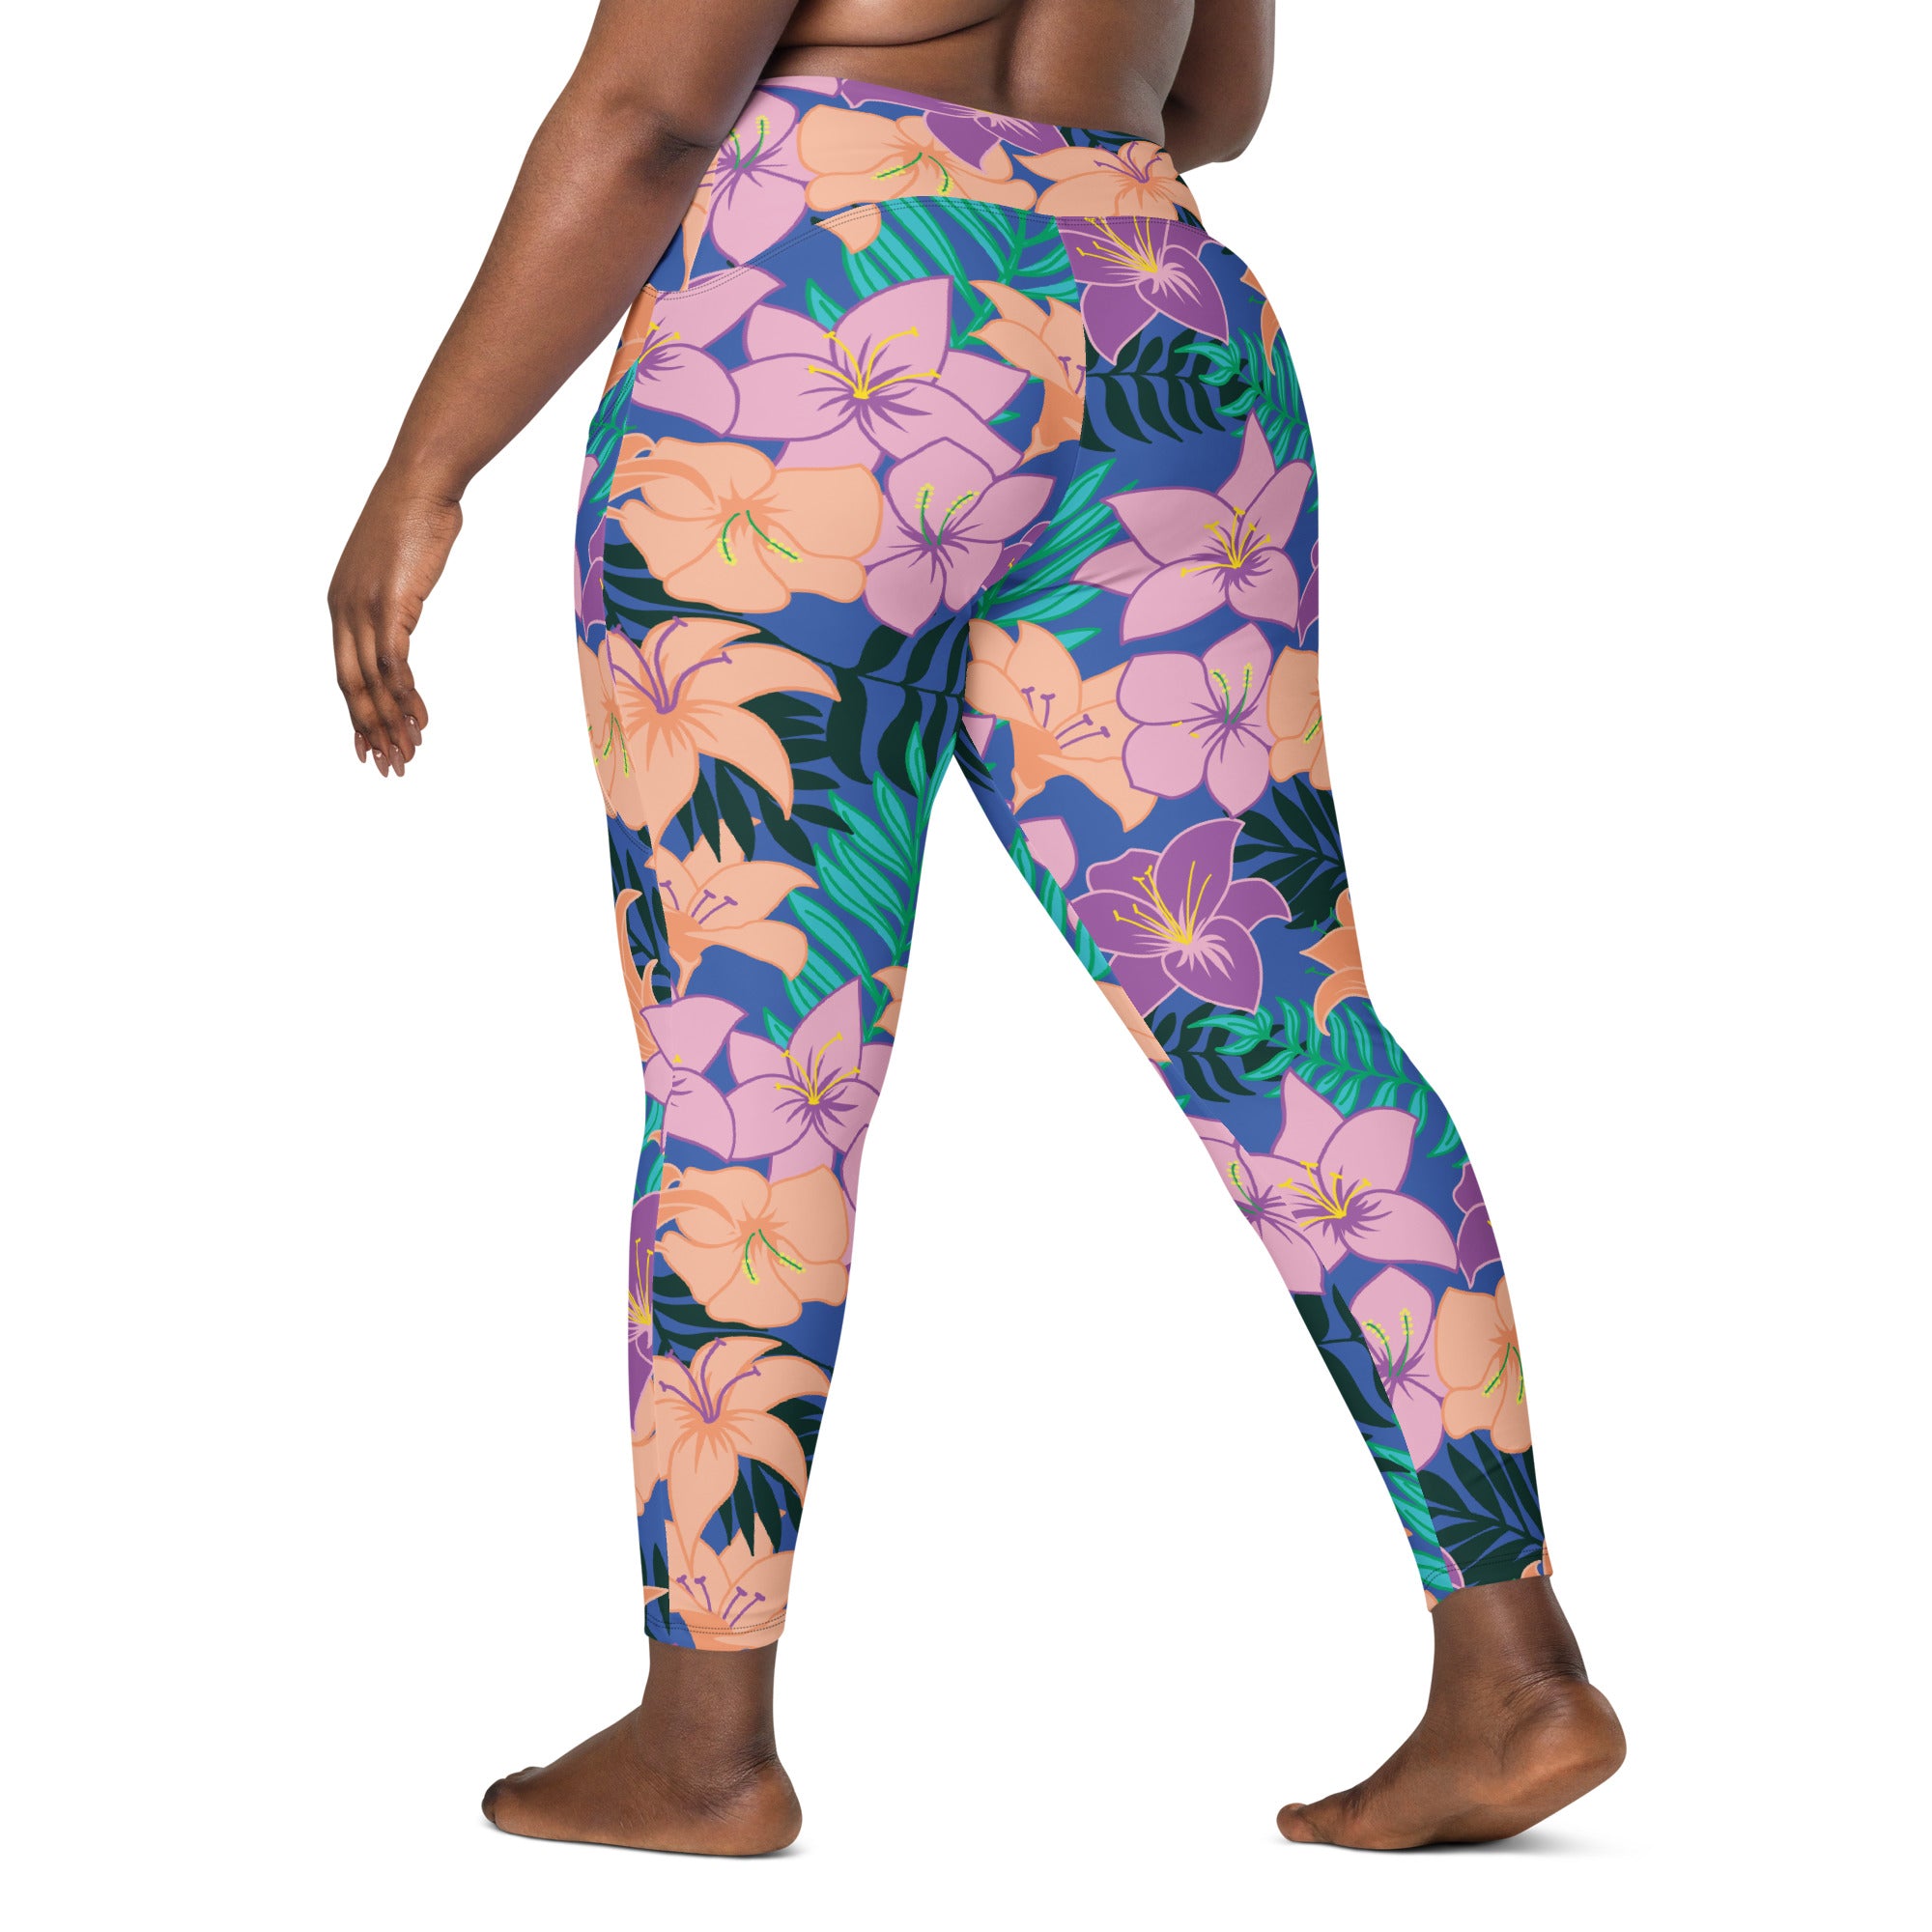 Pink Lemonade Plus Size Crossover Leggings with Pockets